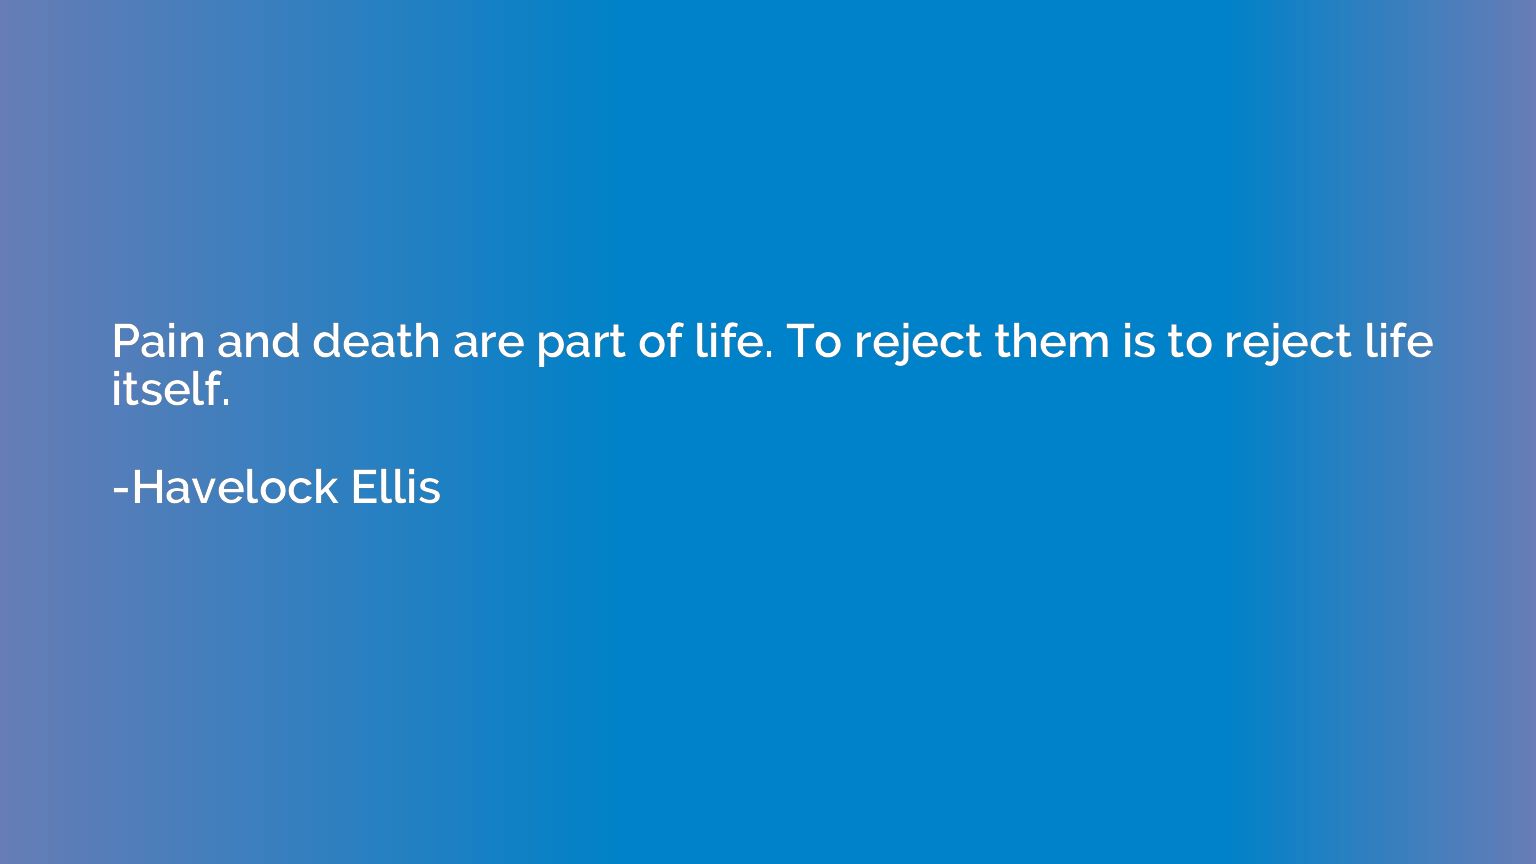 Pain and death are part of life. To reject them is to reject